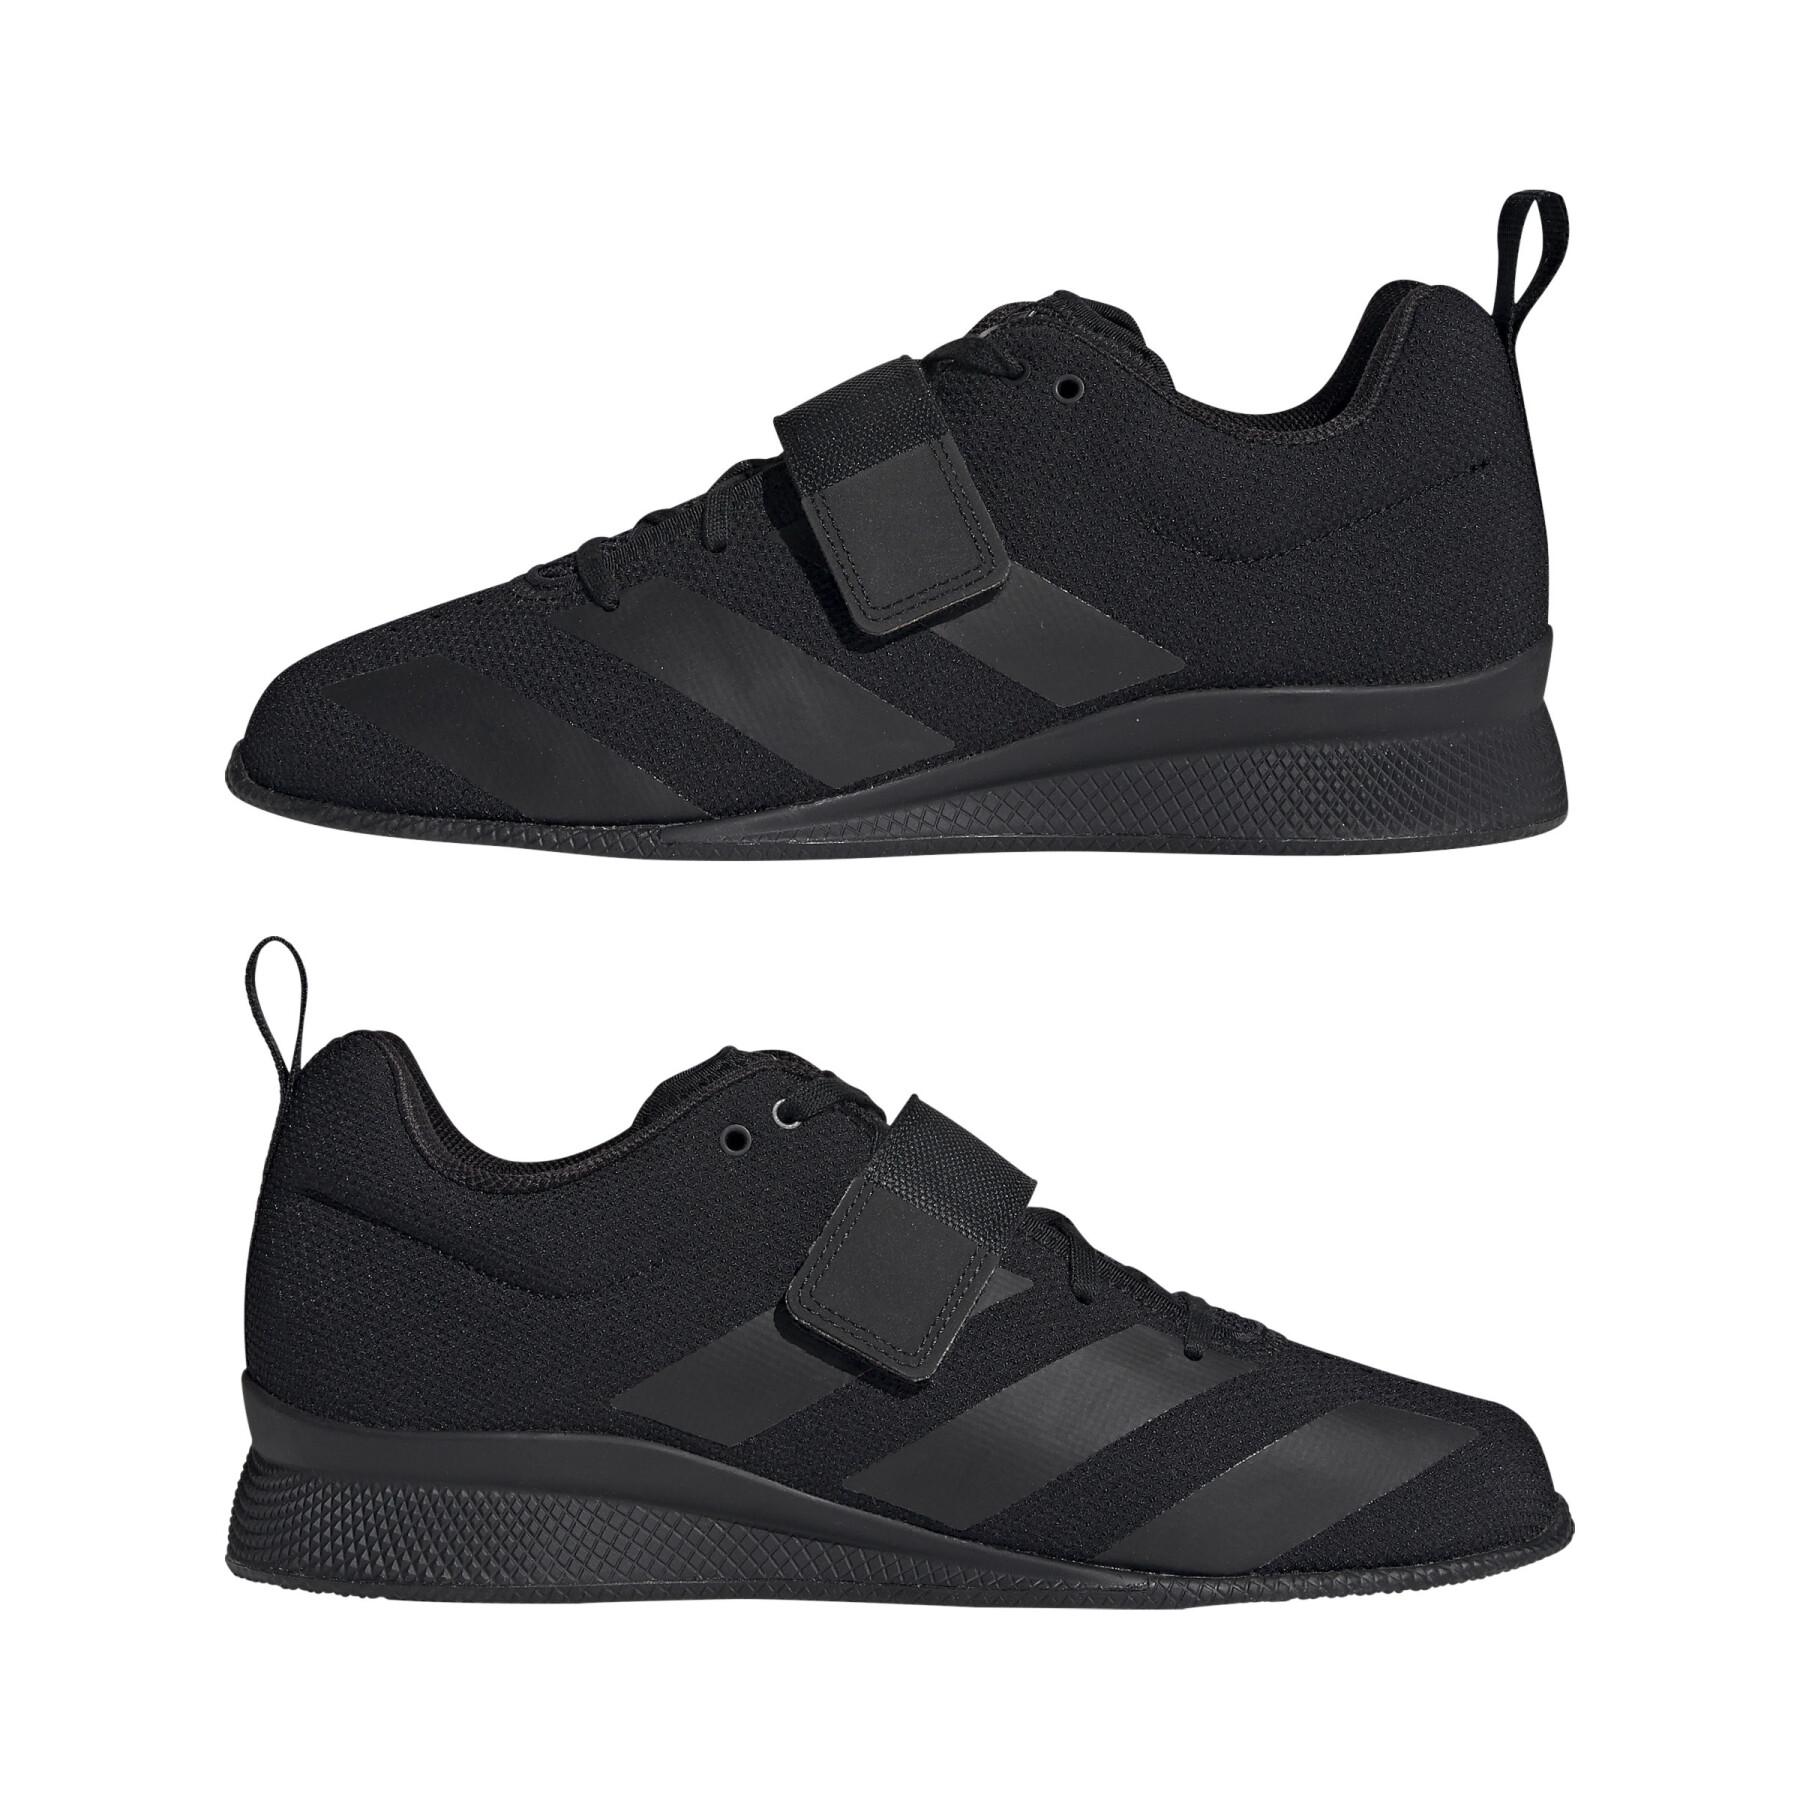 adipower weightlifting 2 shoes